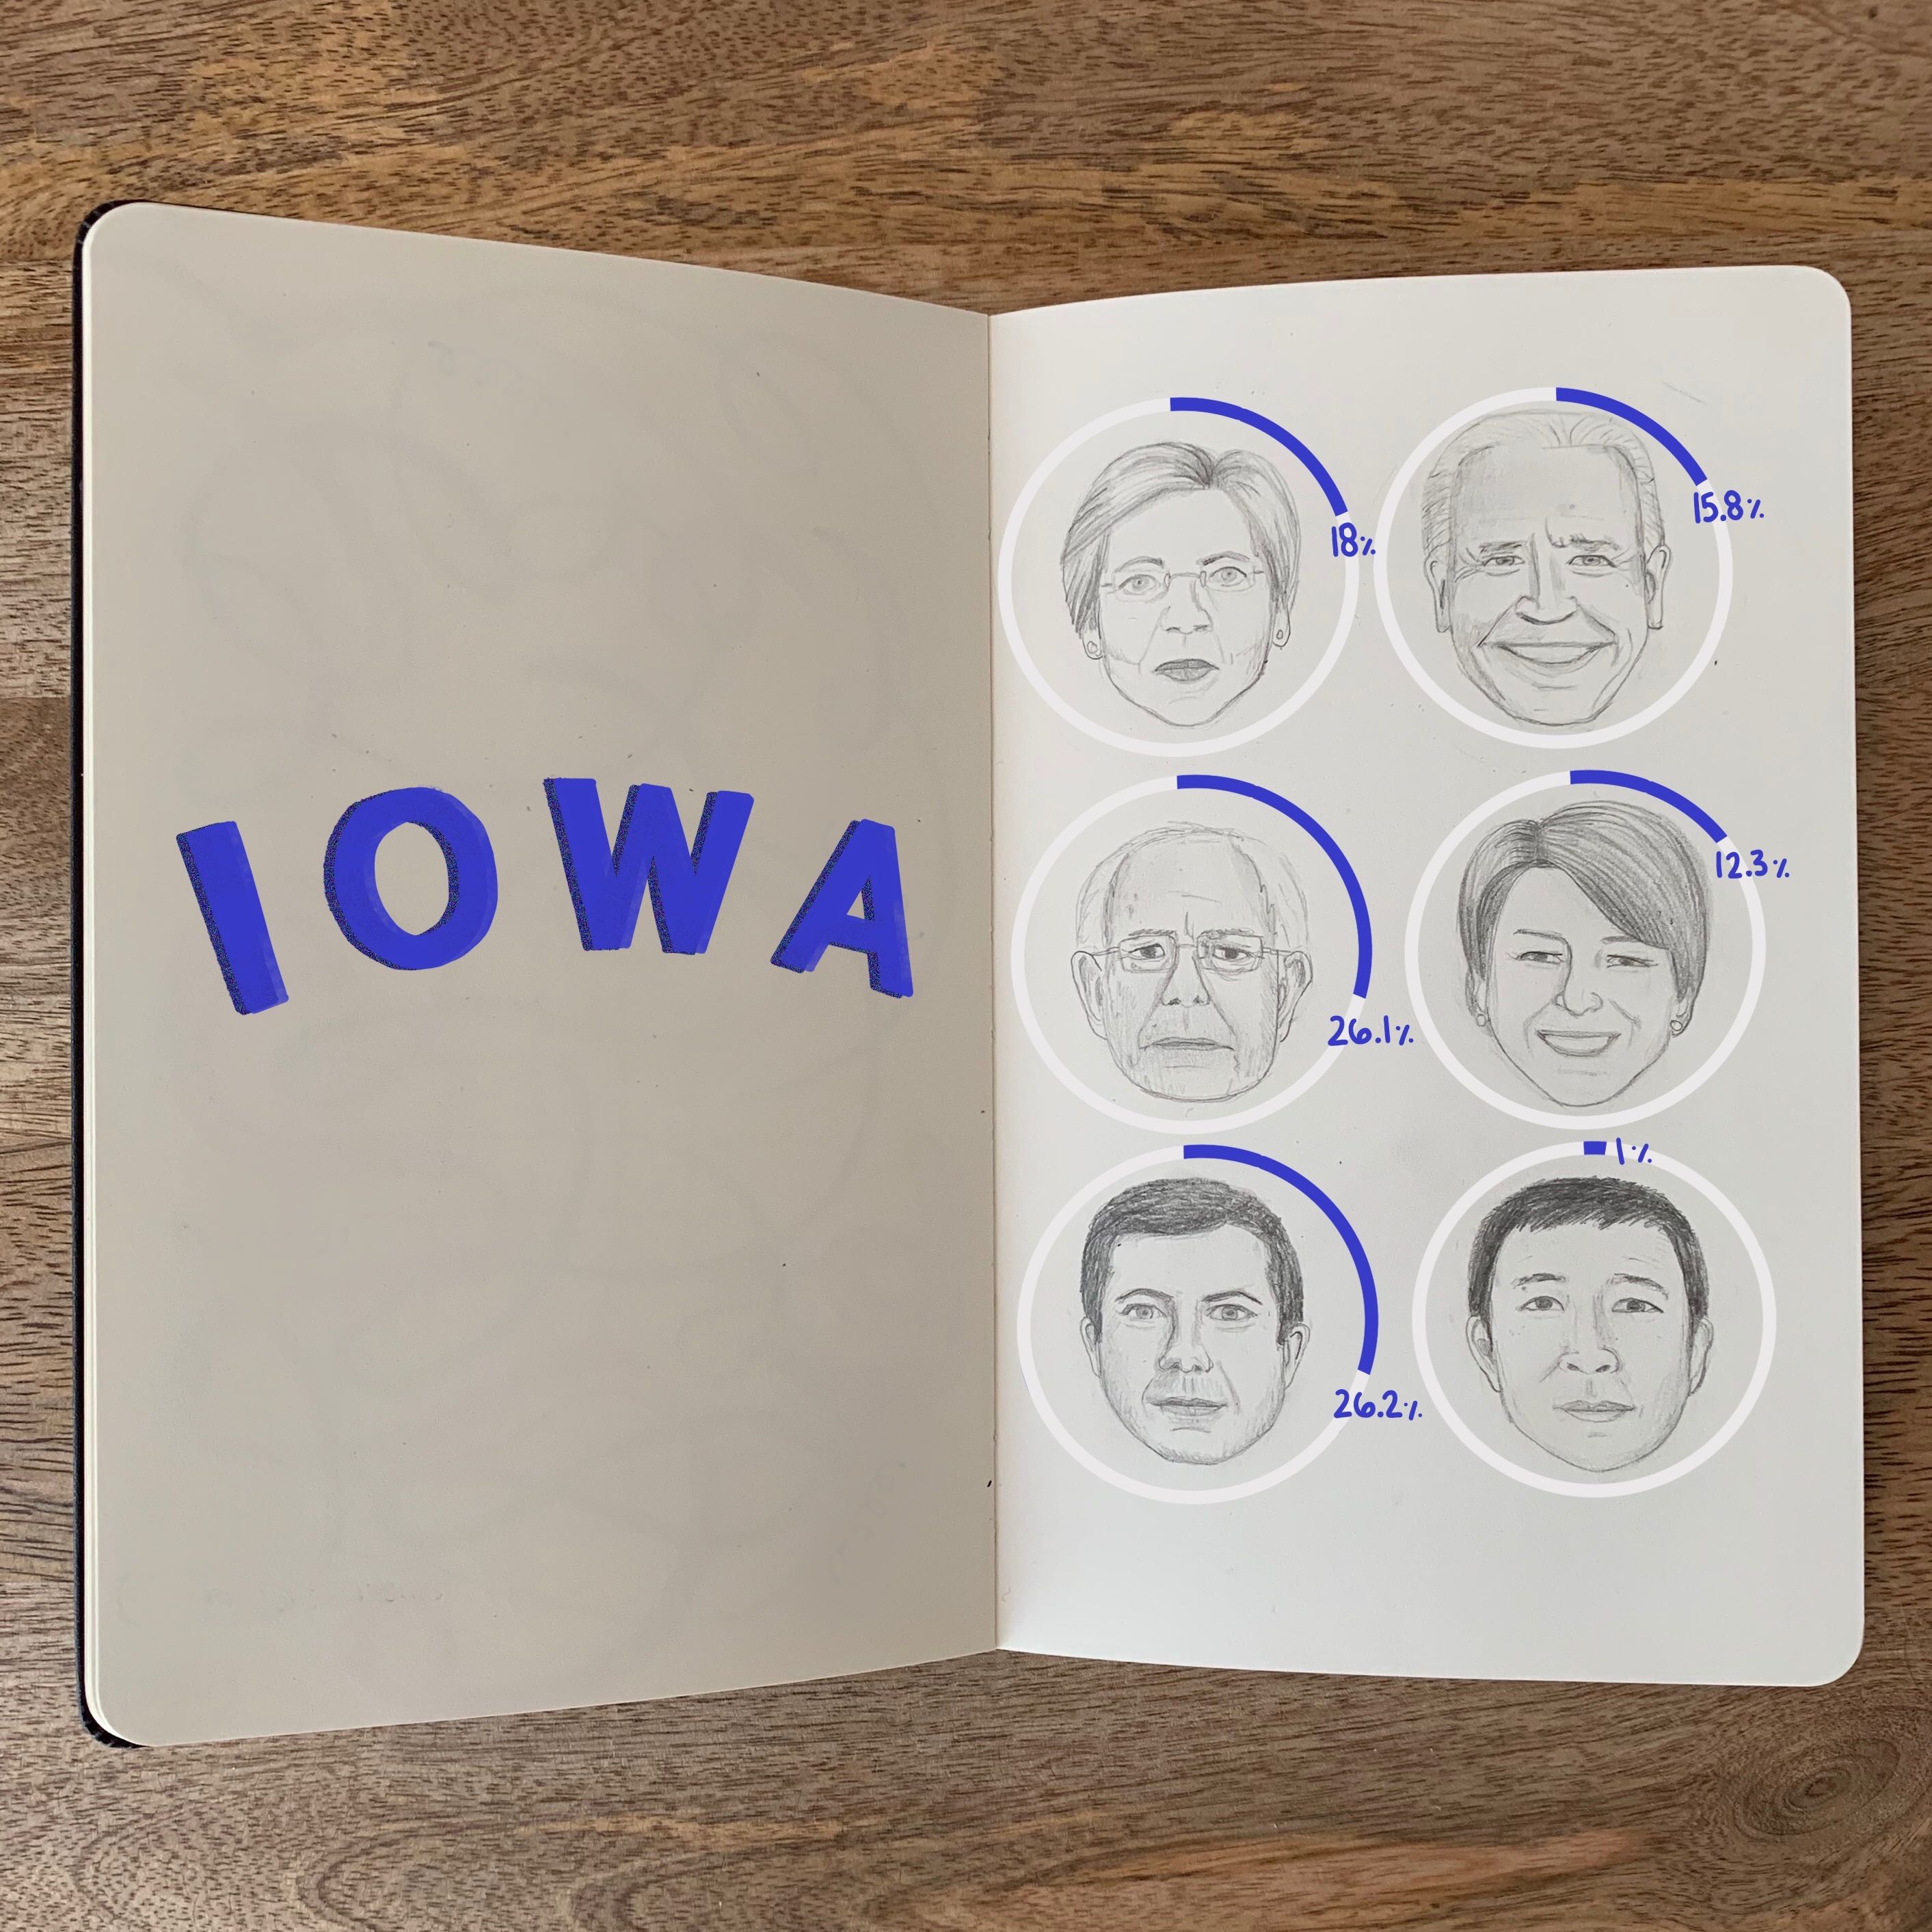 Illustrated 2020presidential candidate portraits with iowa caucus voting result stats